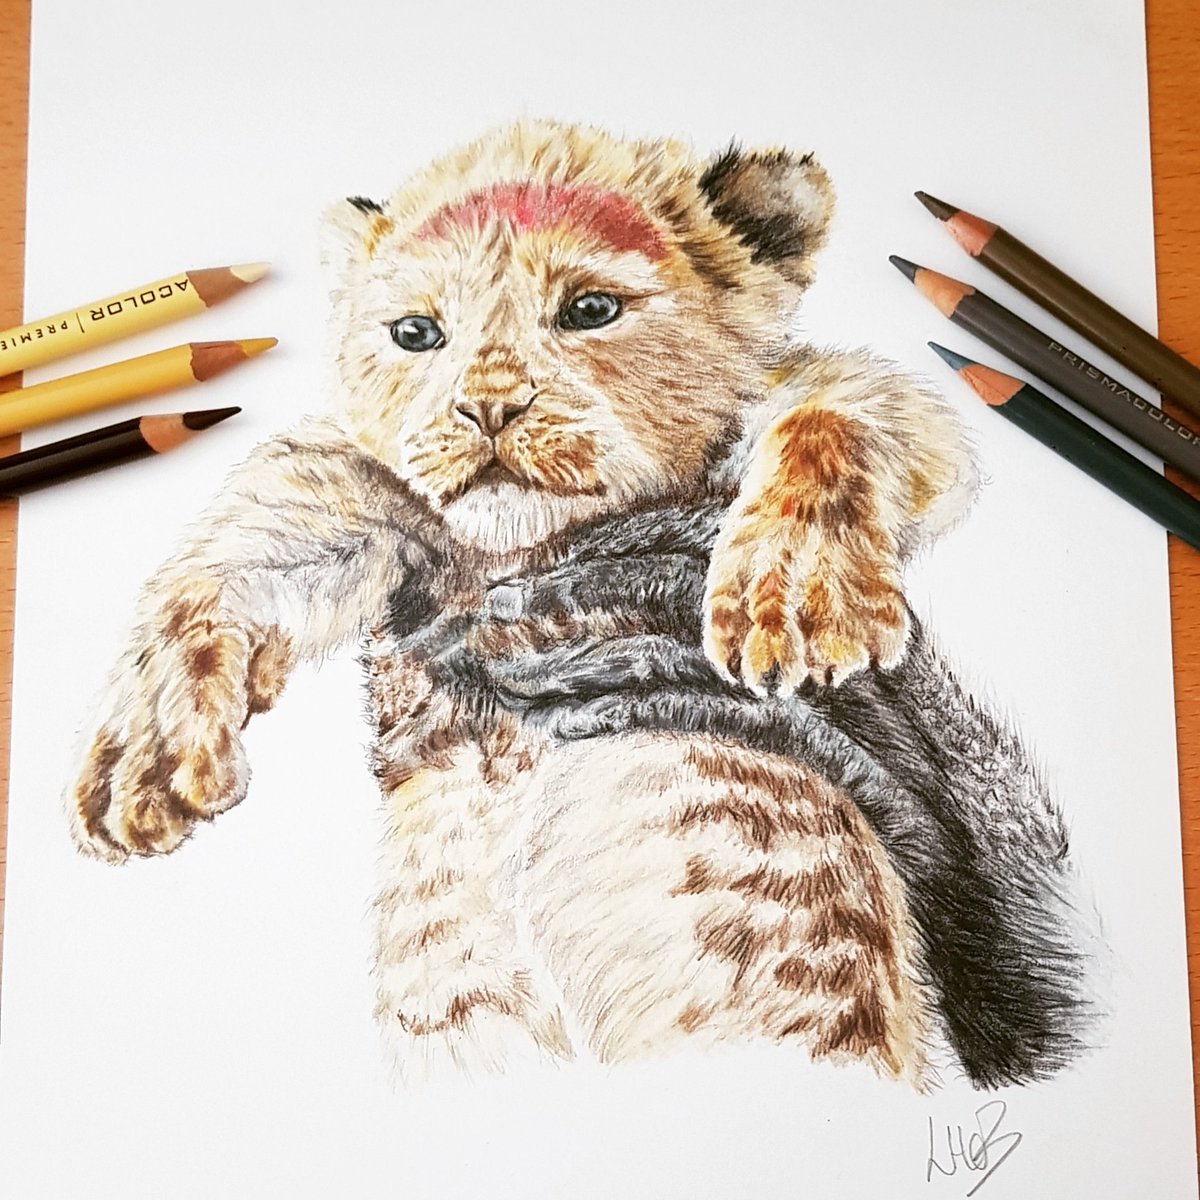 Simba all done, ready for video editing now. Can't wait to see the film. #ArtistOnTwitter
#finishedpiece #drawdaily  #realistart #realism #animalartist #animallovers #filmfanart #simba #lionking #lionking2019 #lynhebbart